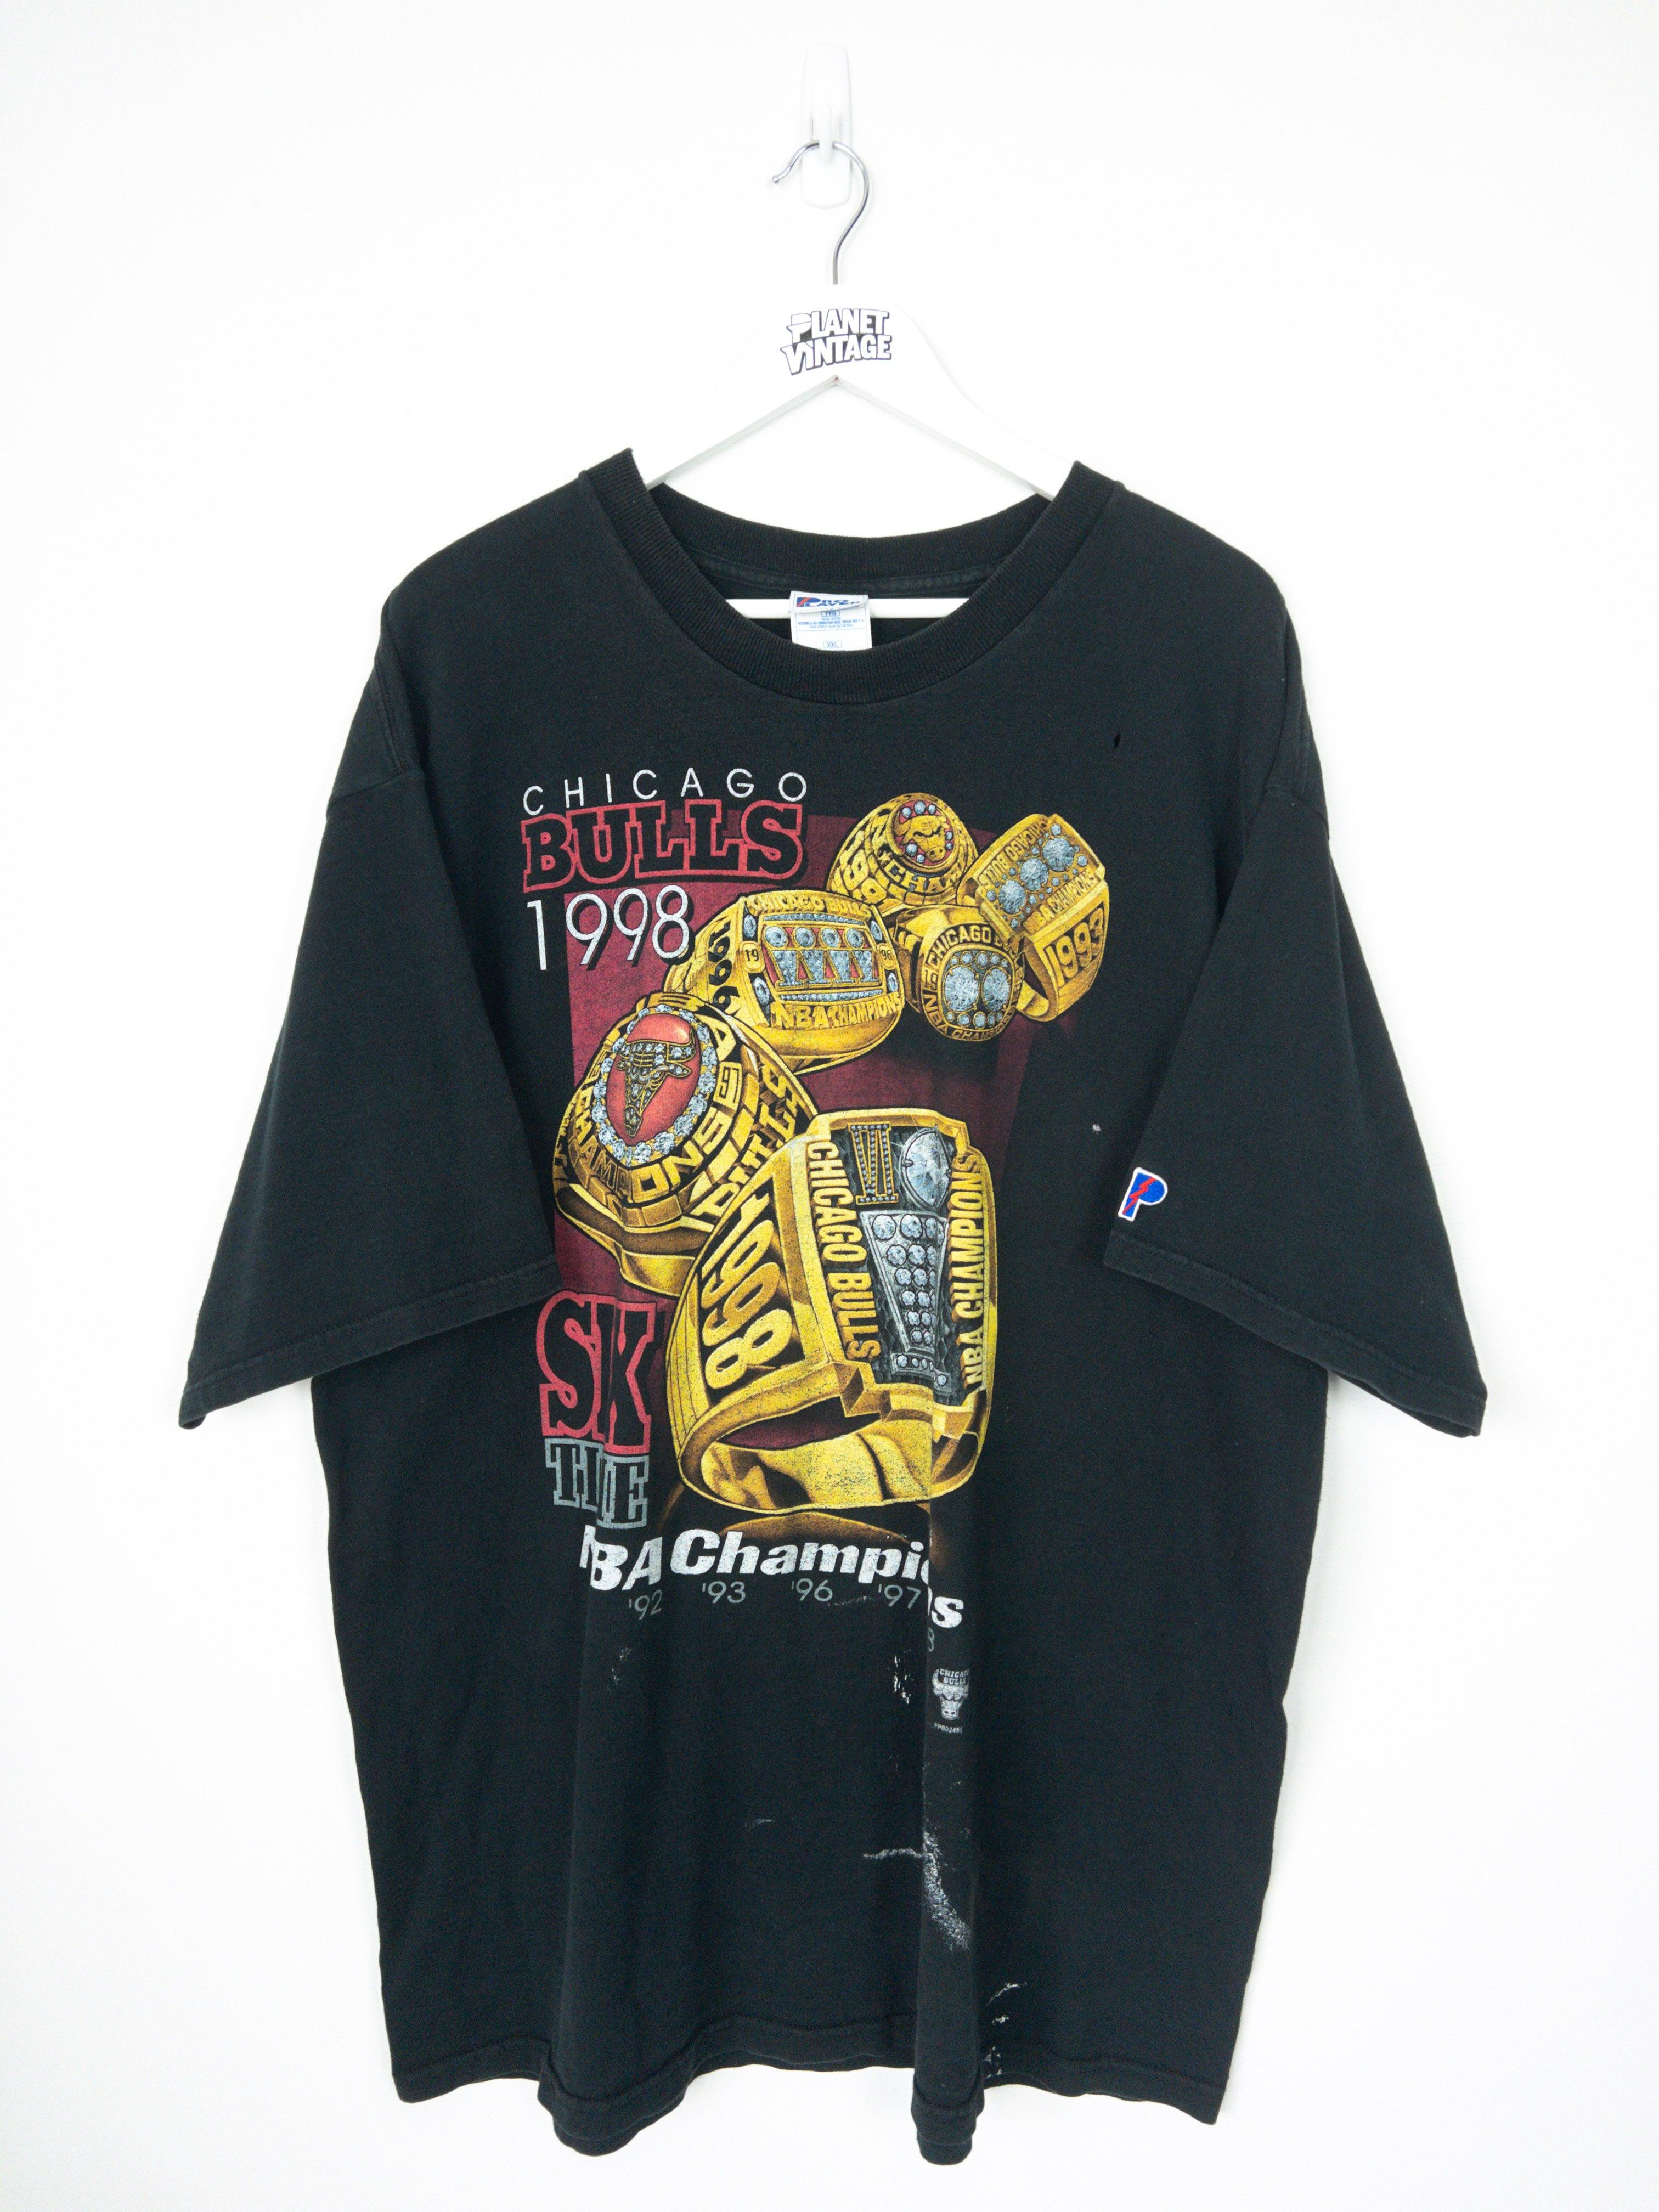 Chicago Bulls Champs 1998 Tee (XXL) - Planet Vintage Store